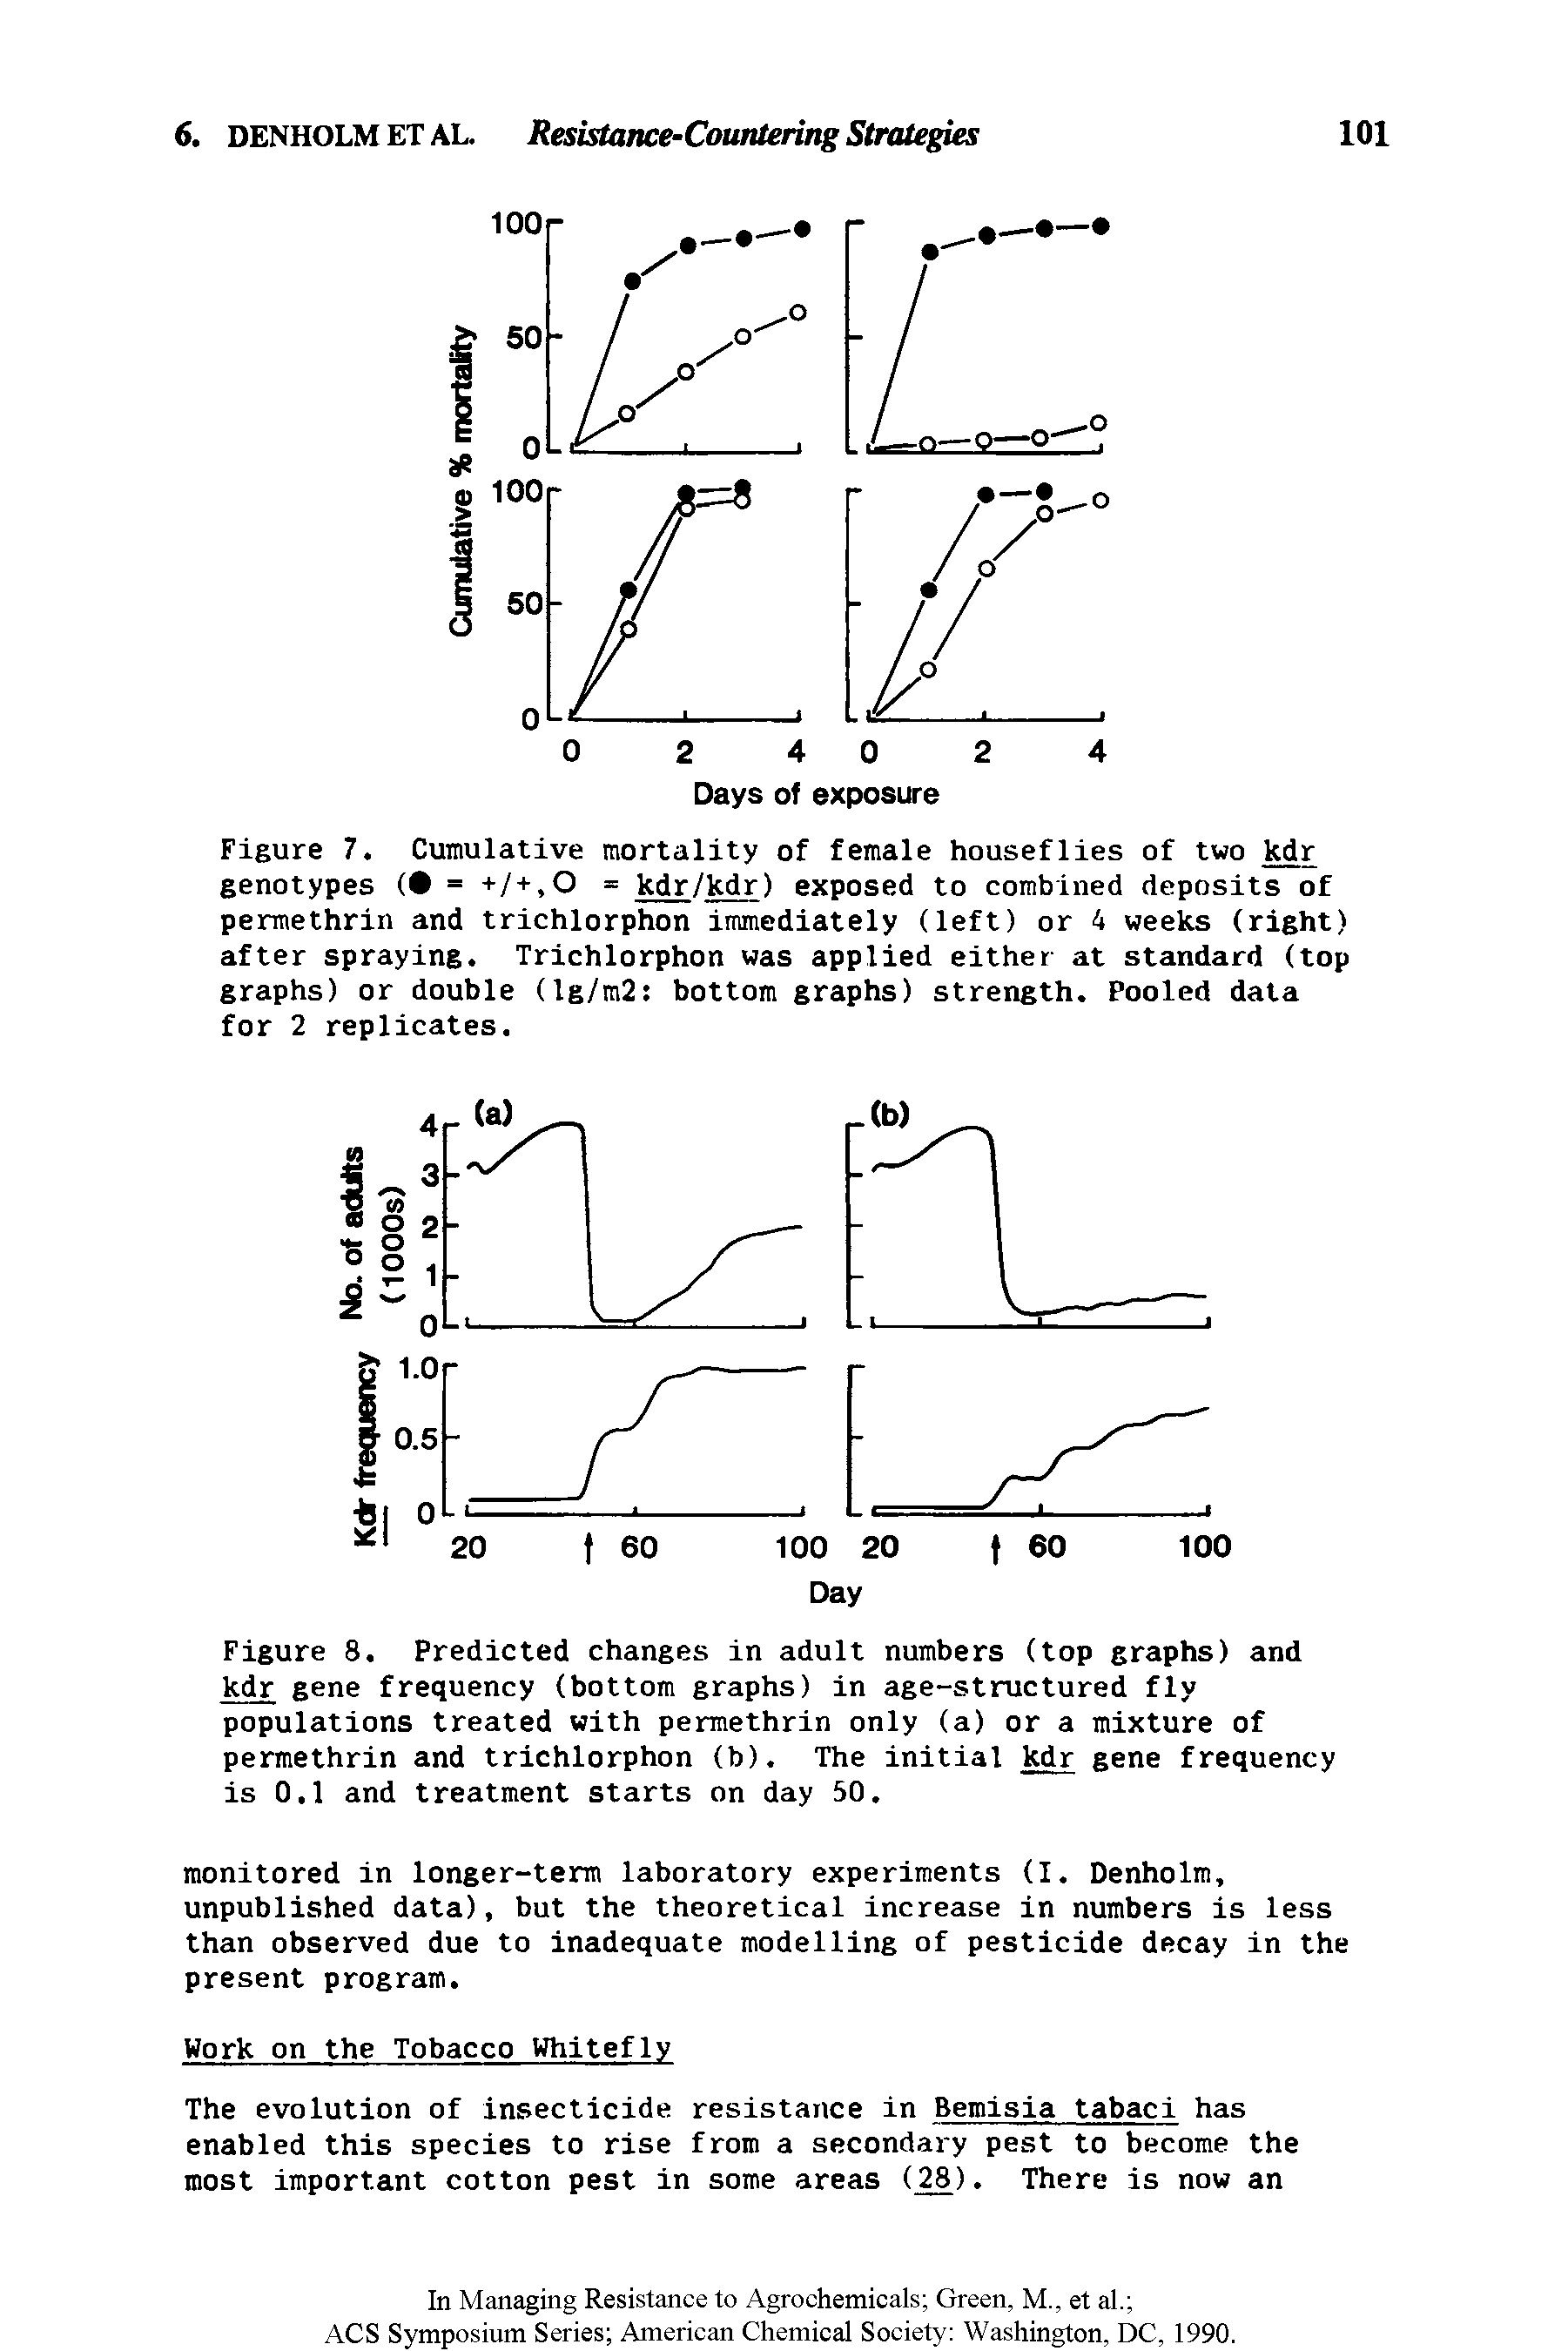 Figure 8. Predicted changes in adult numbers (top graphs) and kdr gene frequency (bottom graphs) in age-structured fly populations treated with permethrin only (a) or a mixture of permethrin and trichlorphon (b). The initial kdr gene frequency is 0.1 and treatment starts on day 50.